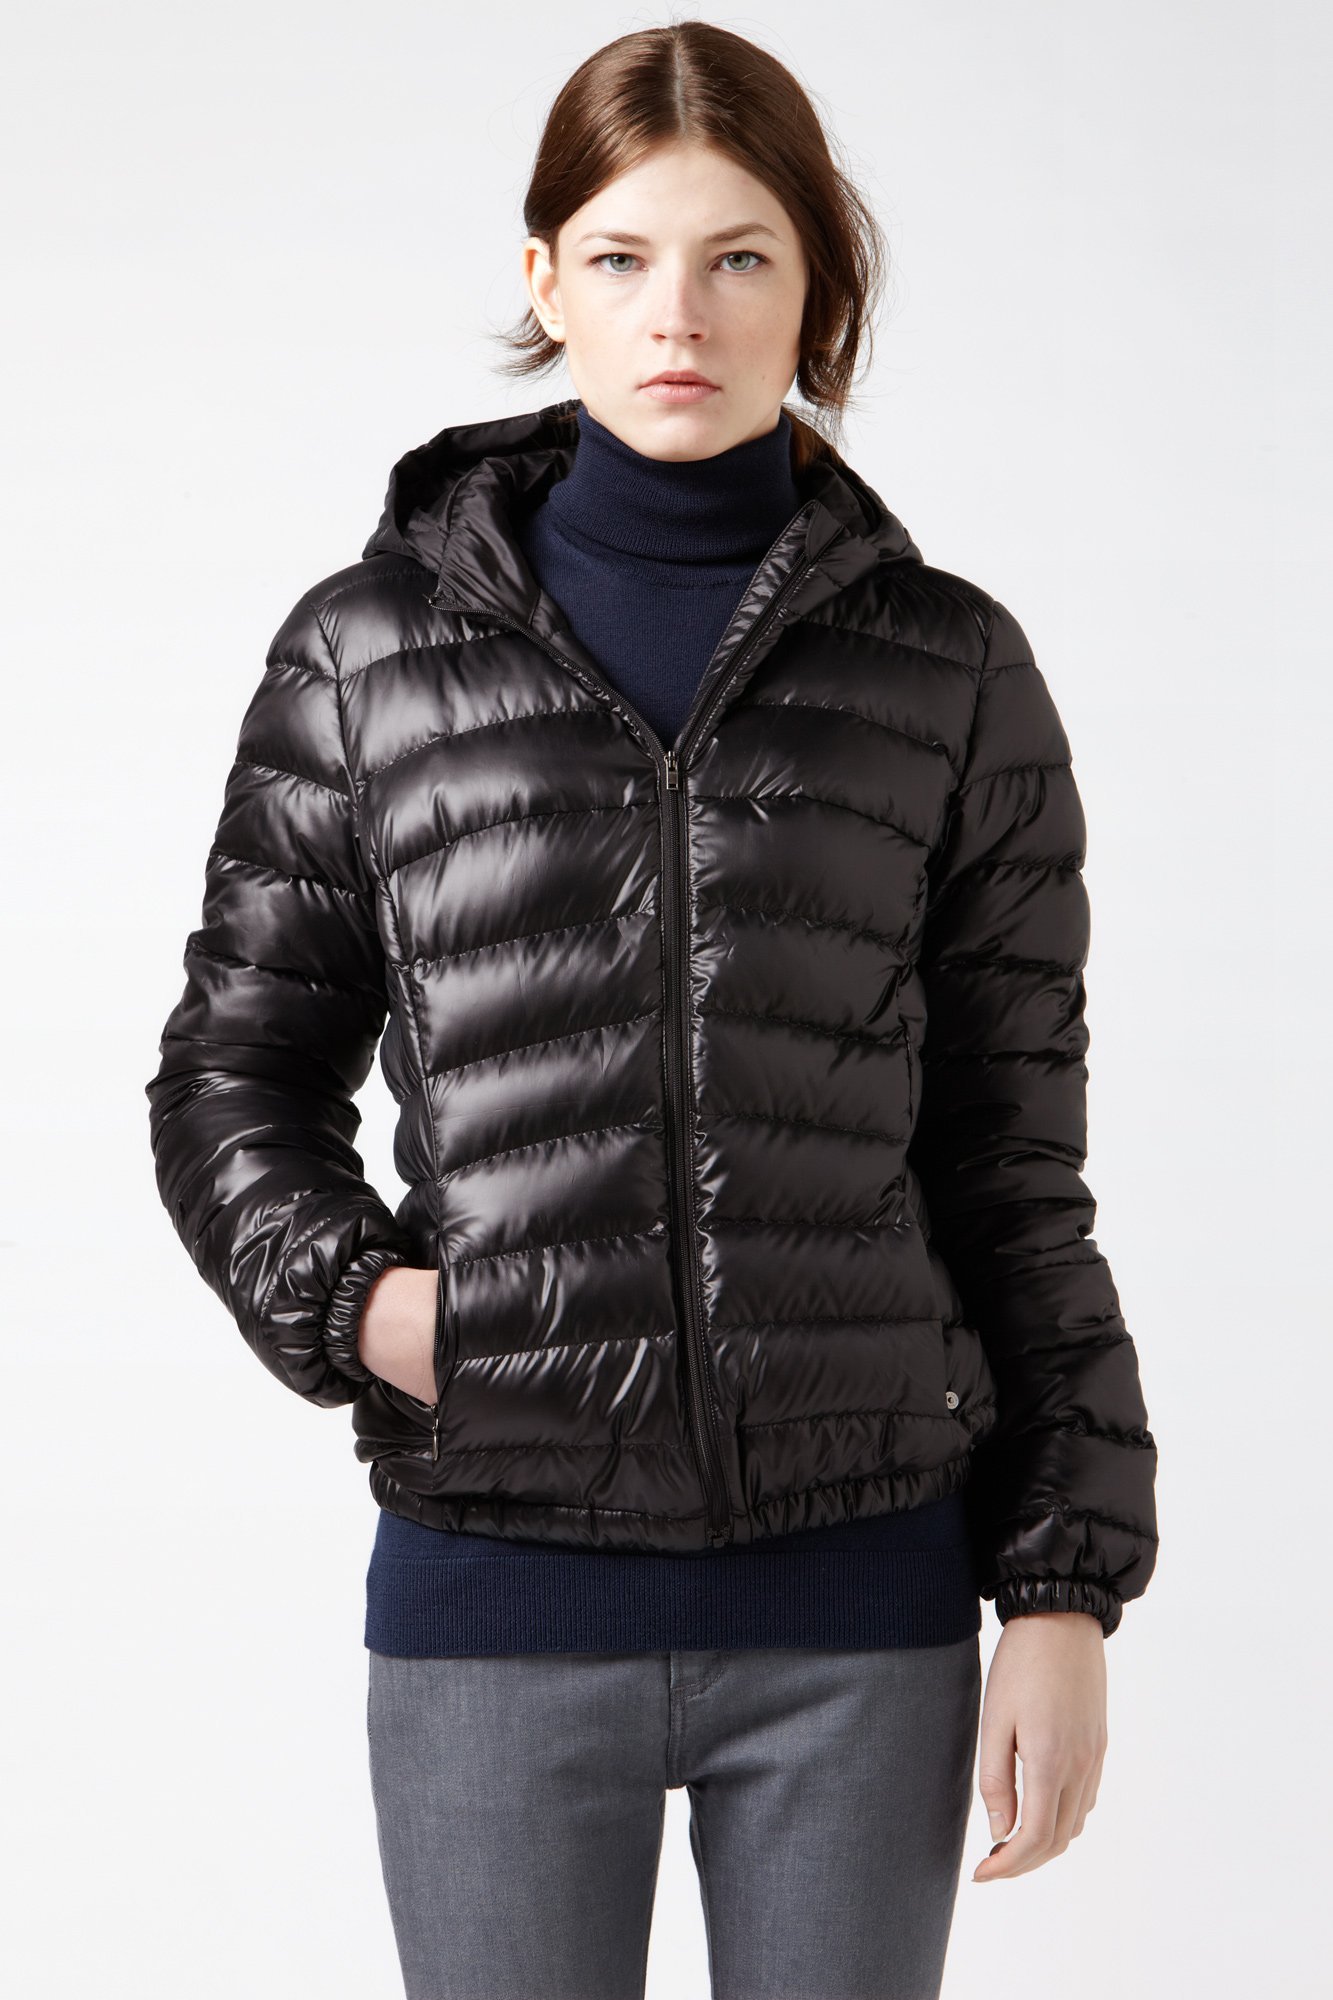 Download this Black Lacoste Down Jacket picture